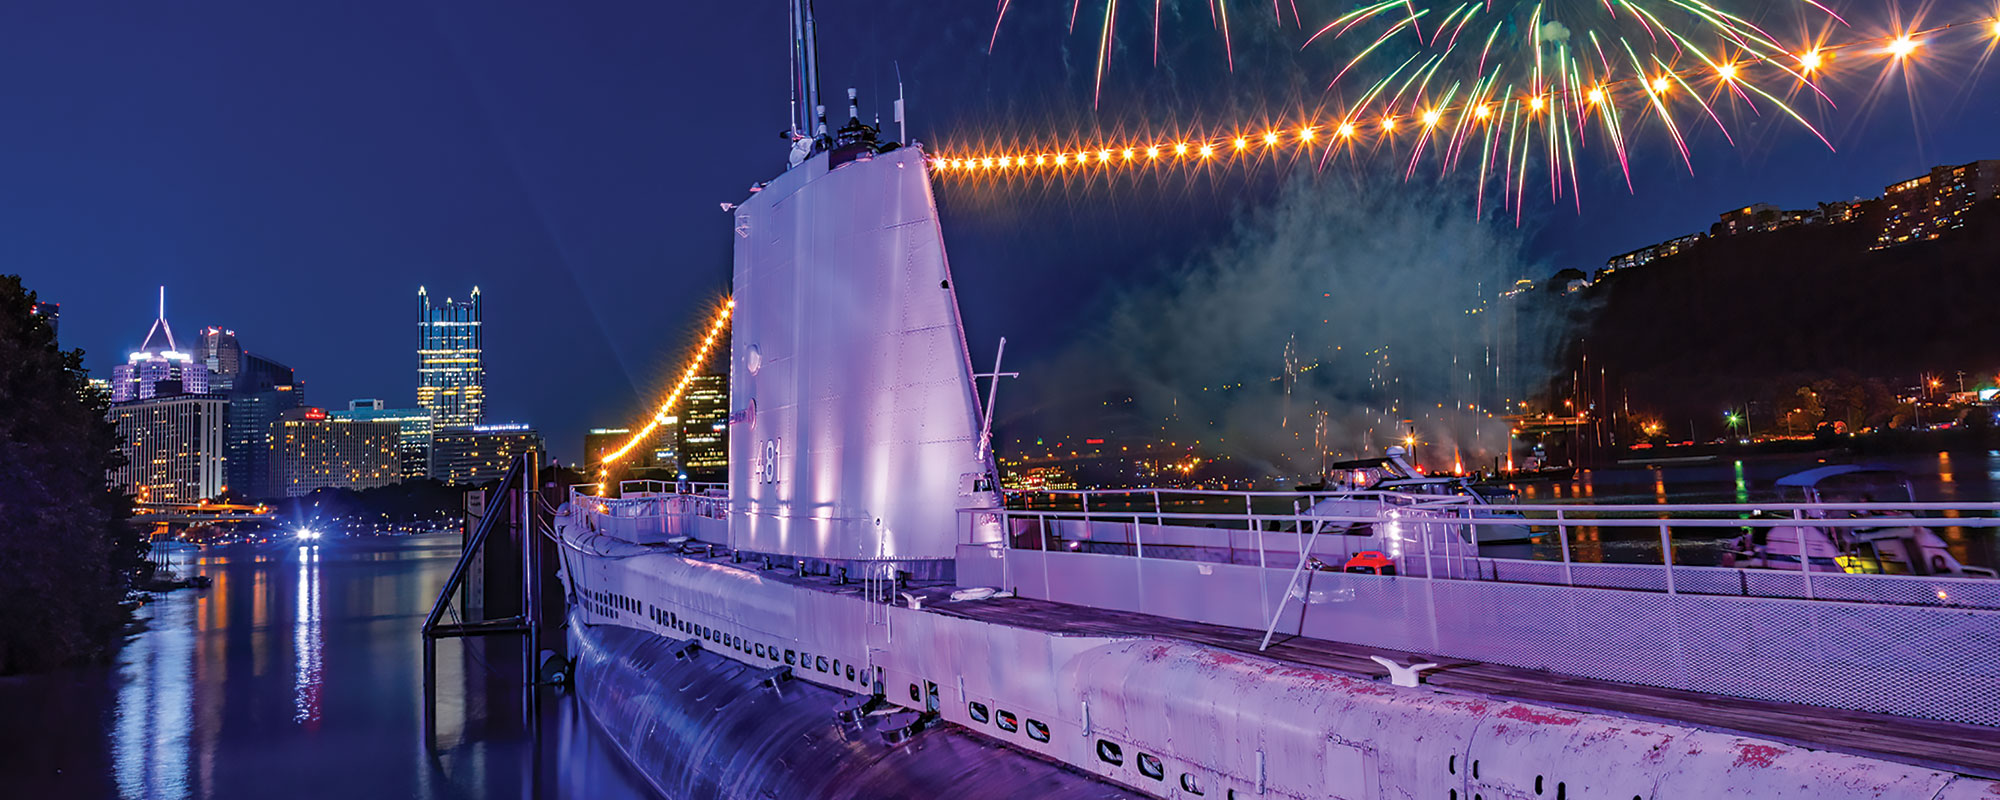 A dramatic photo of a submarine at night with lights and fireworks around it.